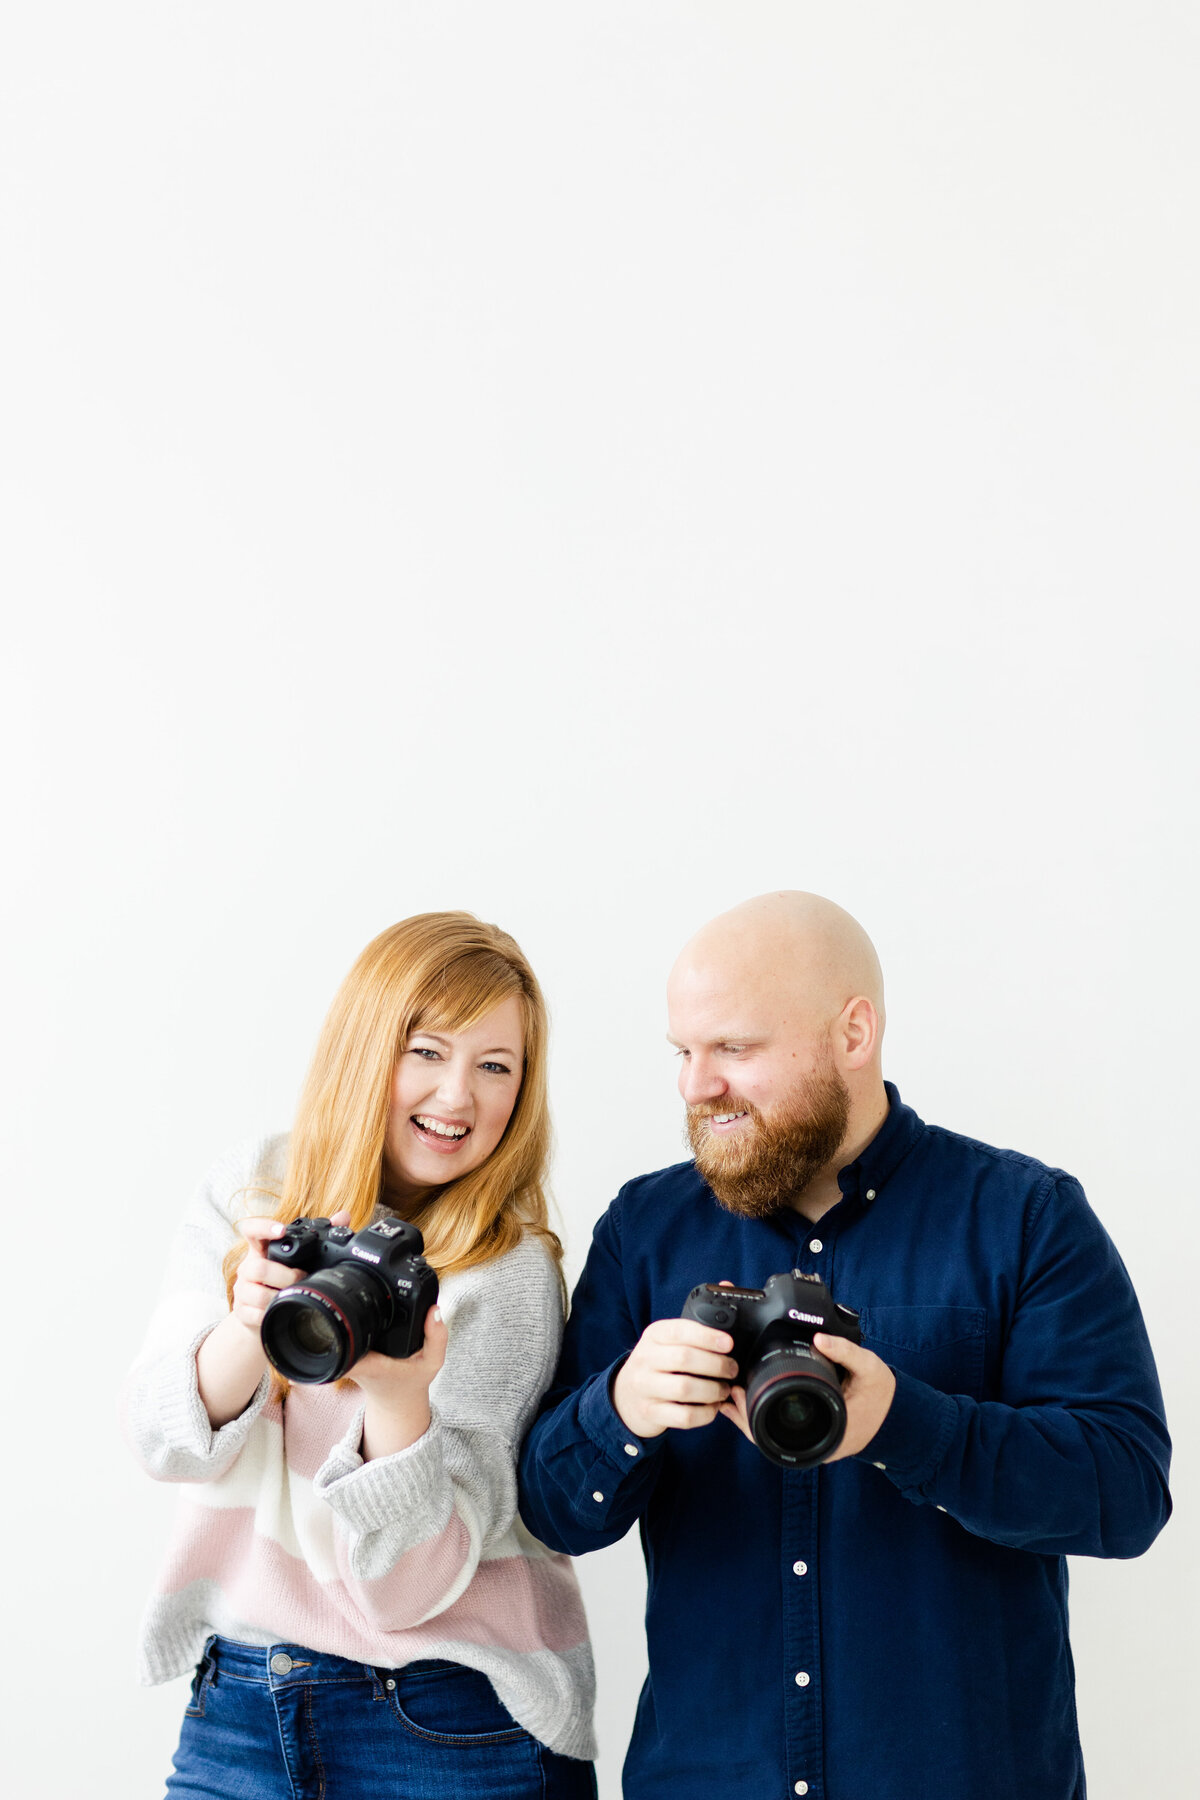 husband and wife wedding photographers posing with cameras for branding shoot